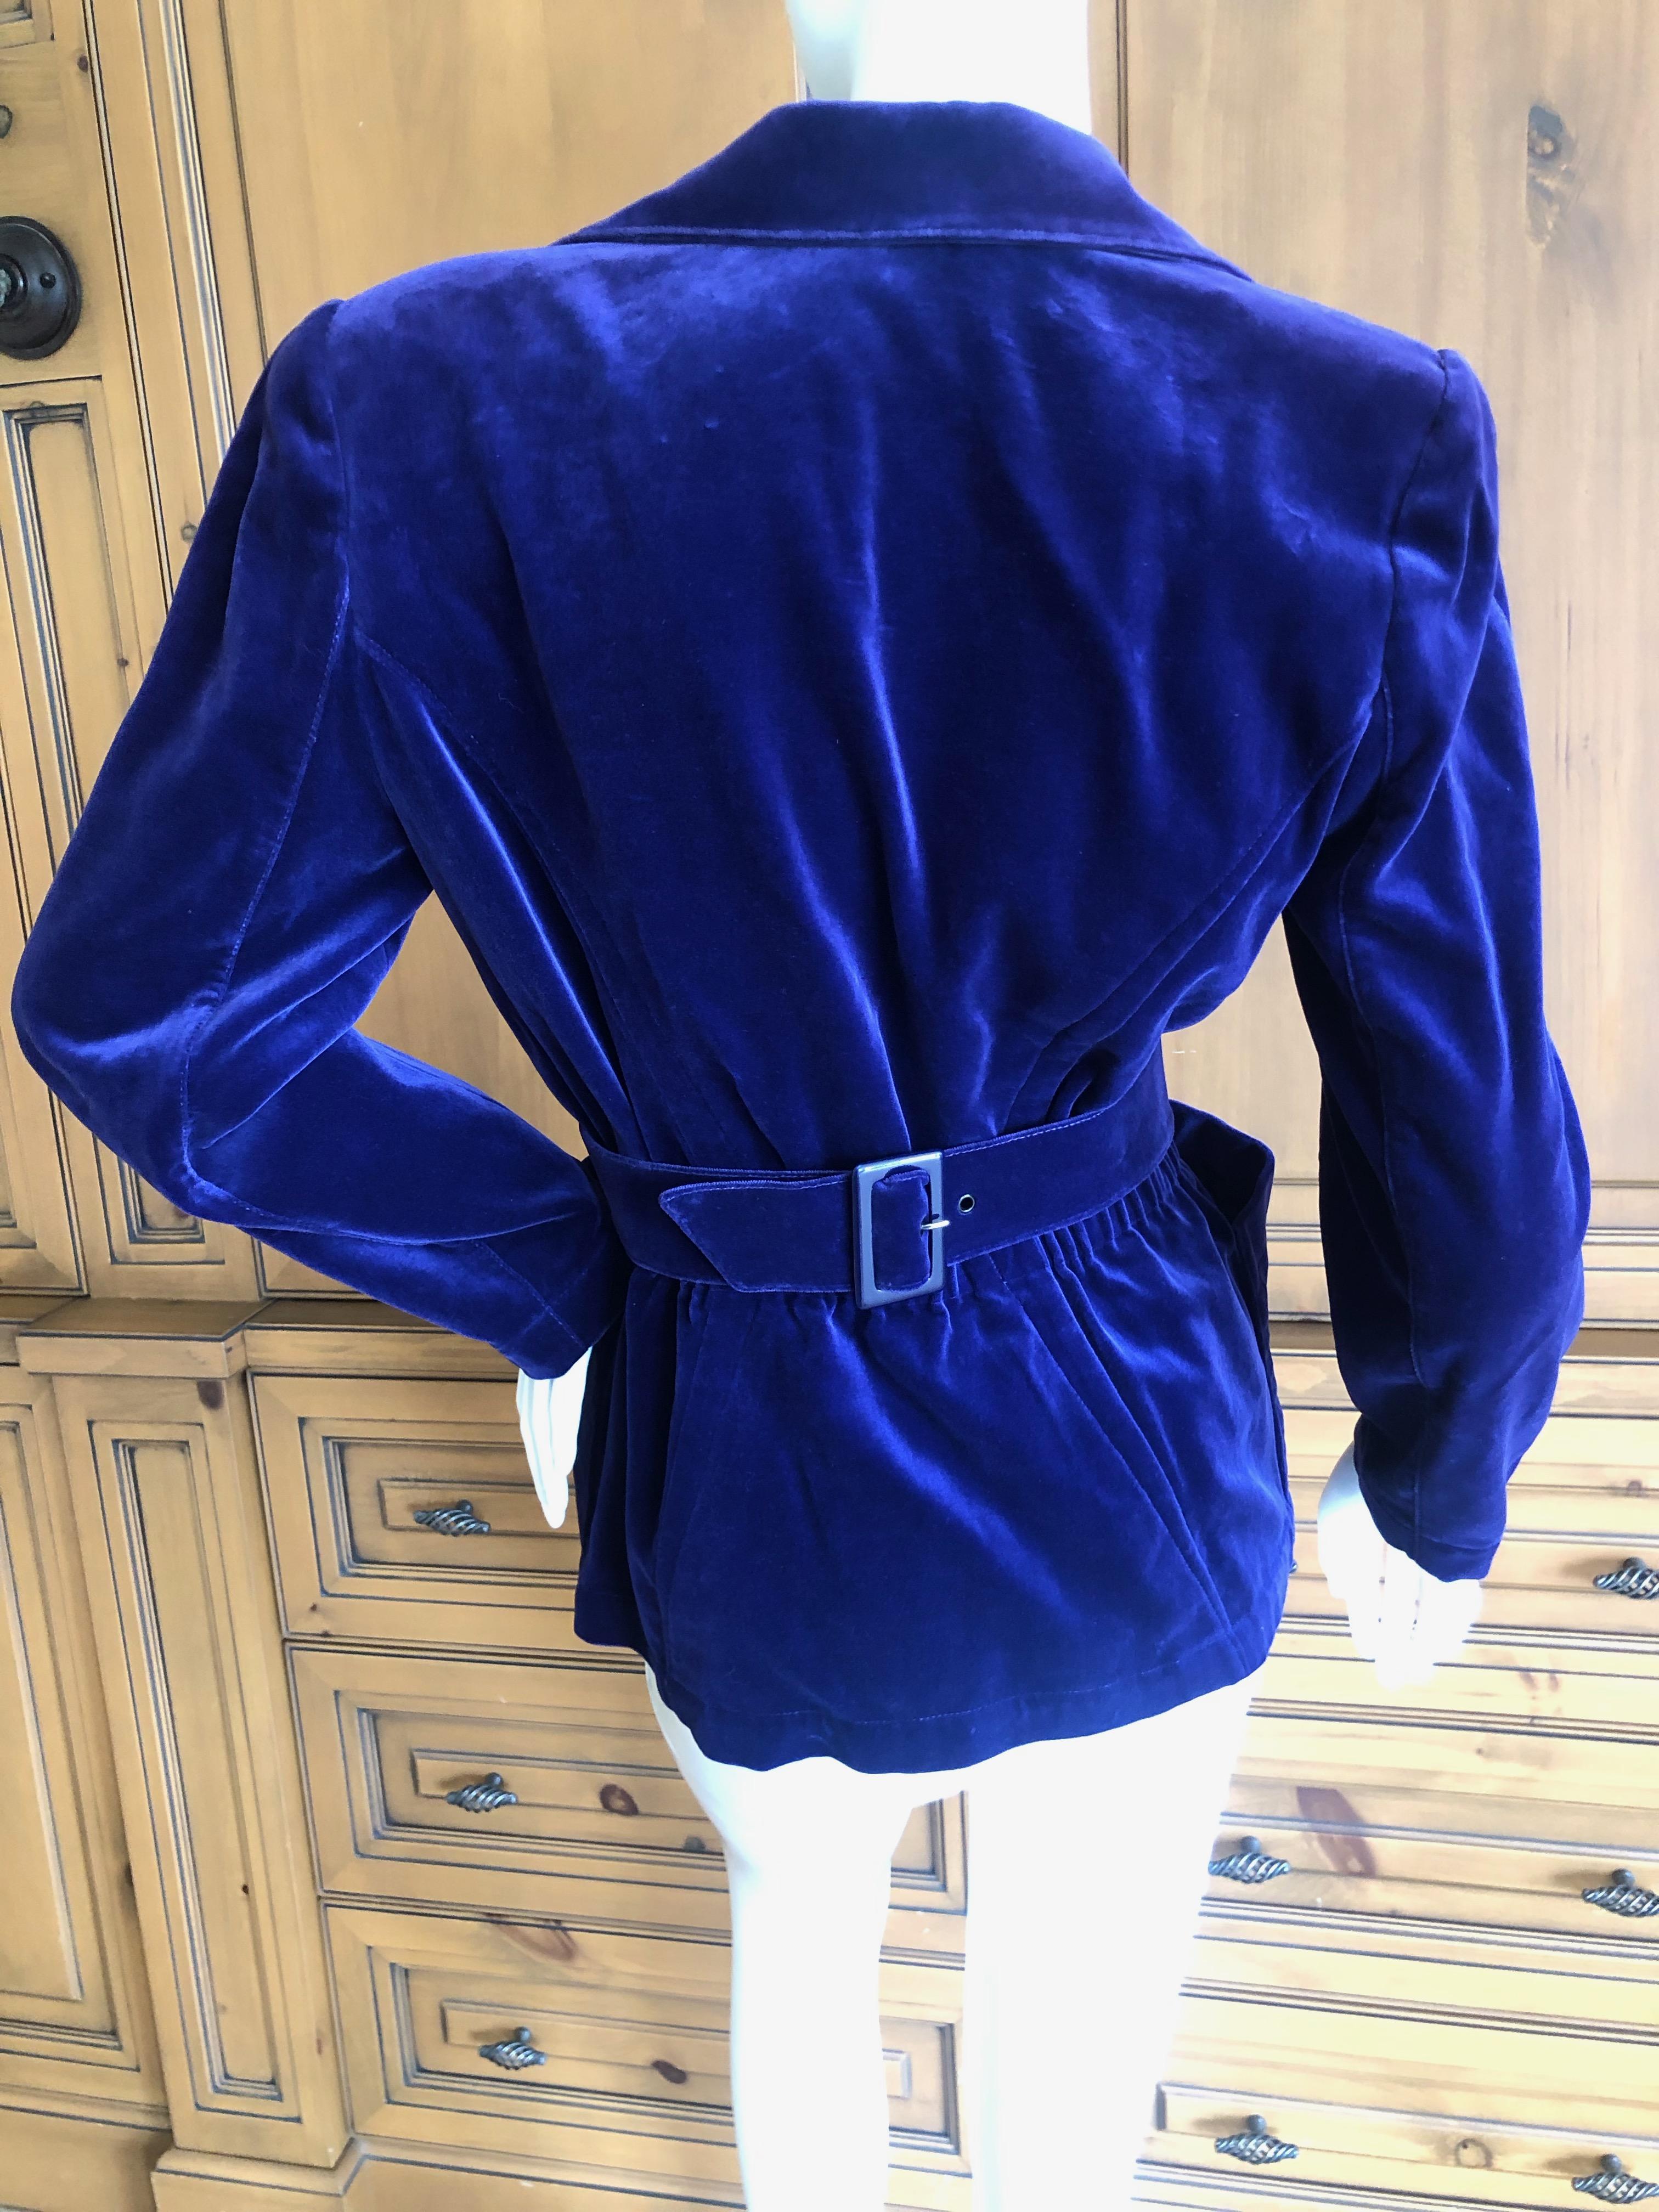 Thierry Mugler Vintage 1980's Blue Velvet Jacket with Back Belt In Excellent Condition For Sale In Cloverdale, CA